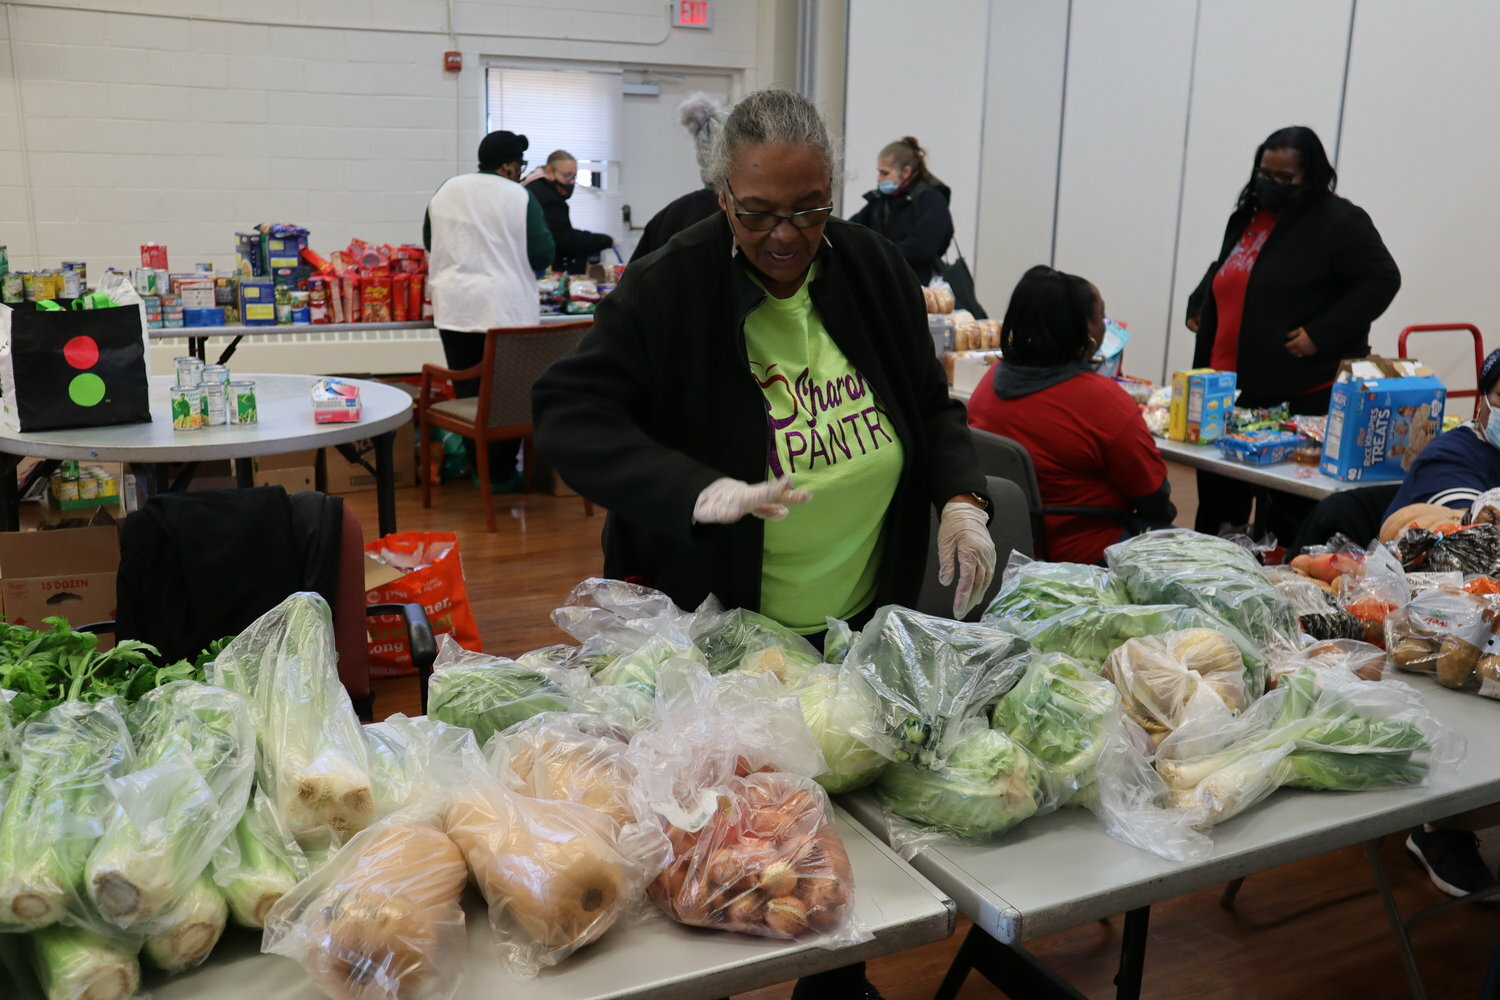 Sharon Sheppard, assistant director of the MLK Center and founder of Sharon’s Pantry, provides produce to community members facing food insecurity.